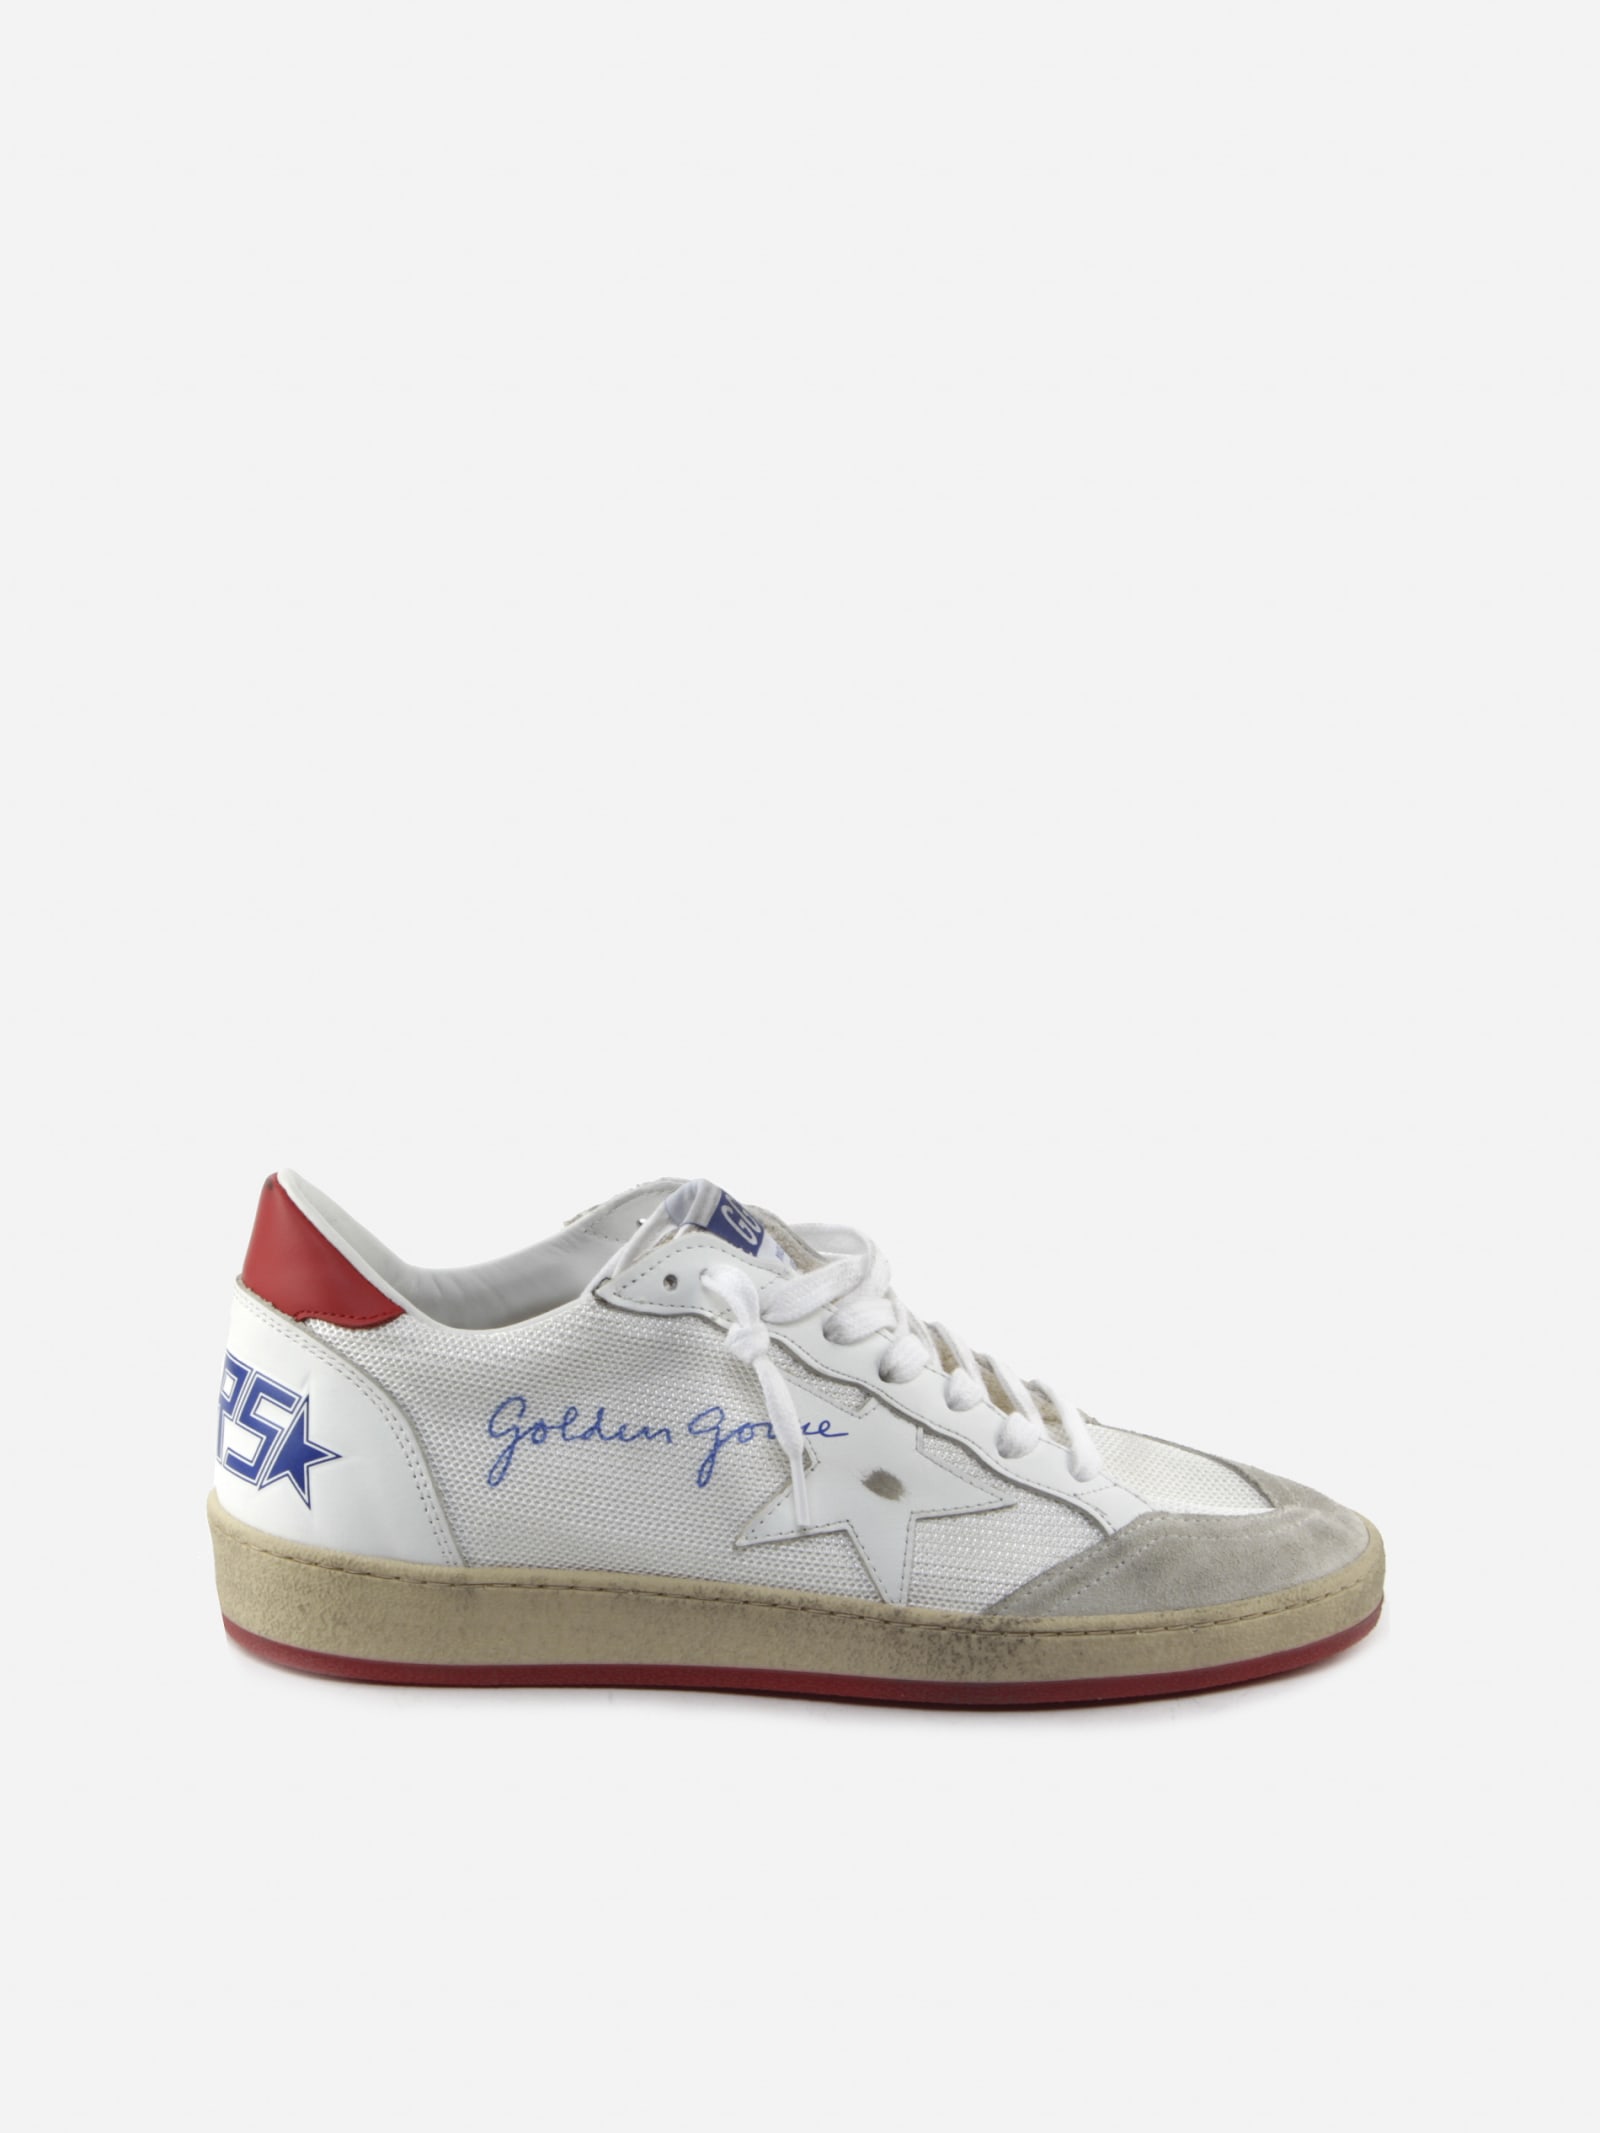 Golden Goose Ball Star Sneakers In Leather